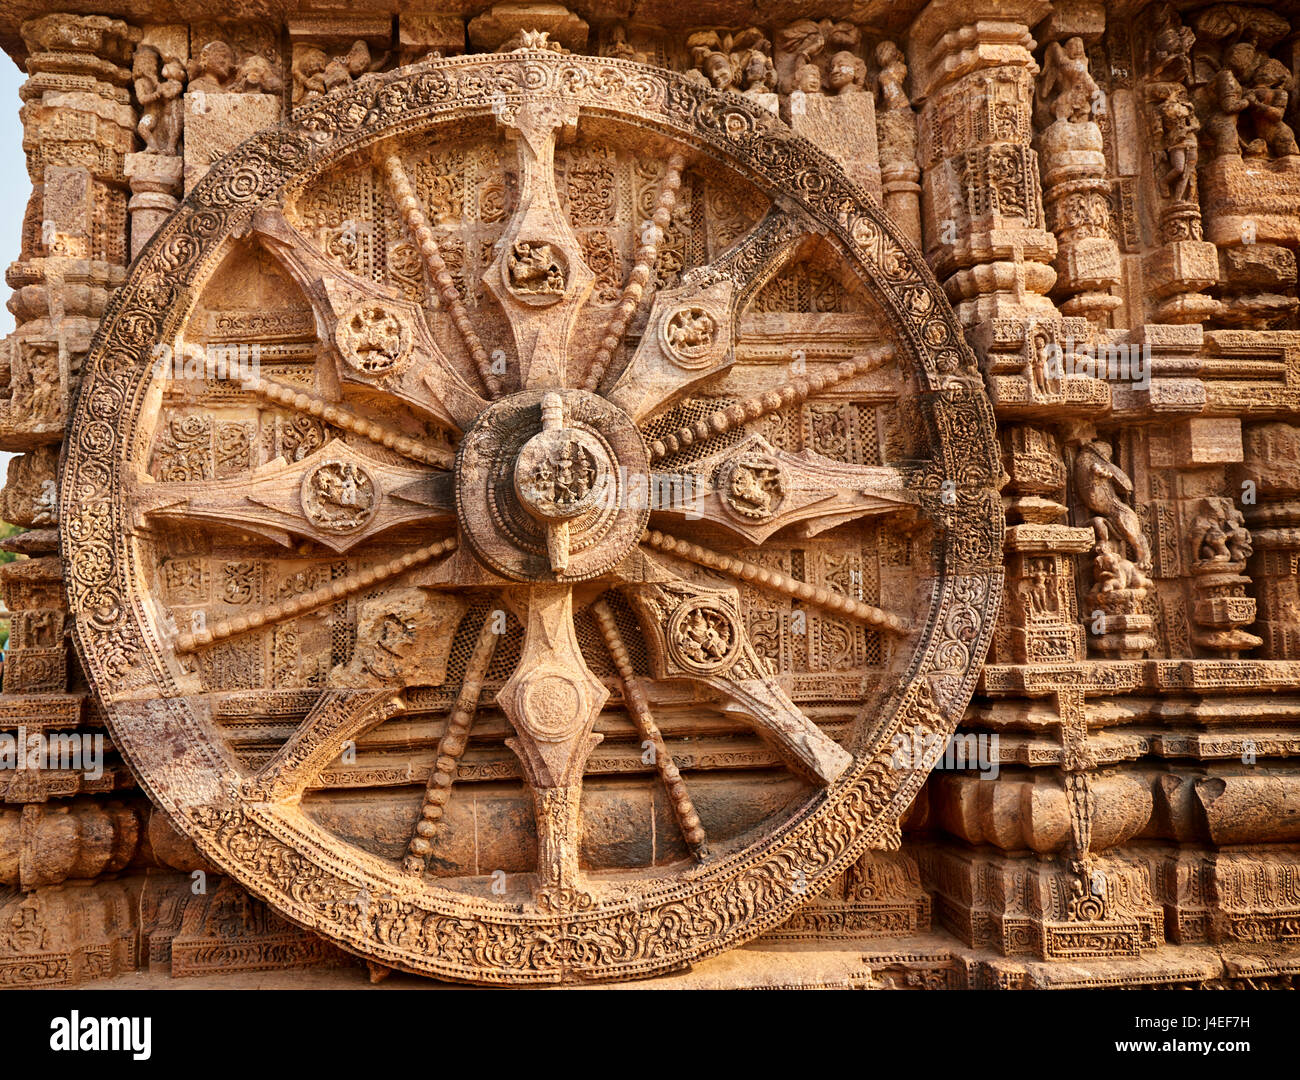 Ancient sandstone carvings on the walls of the ancient sun temple at Konark, India. Stock Photo